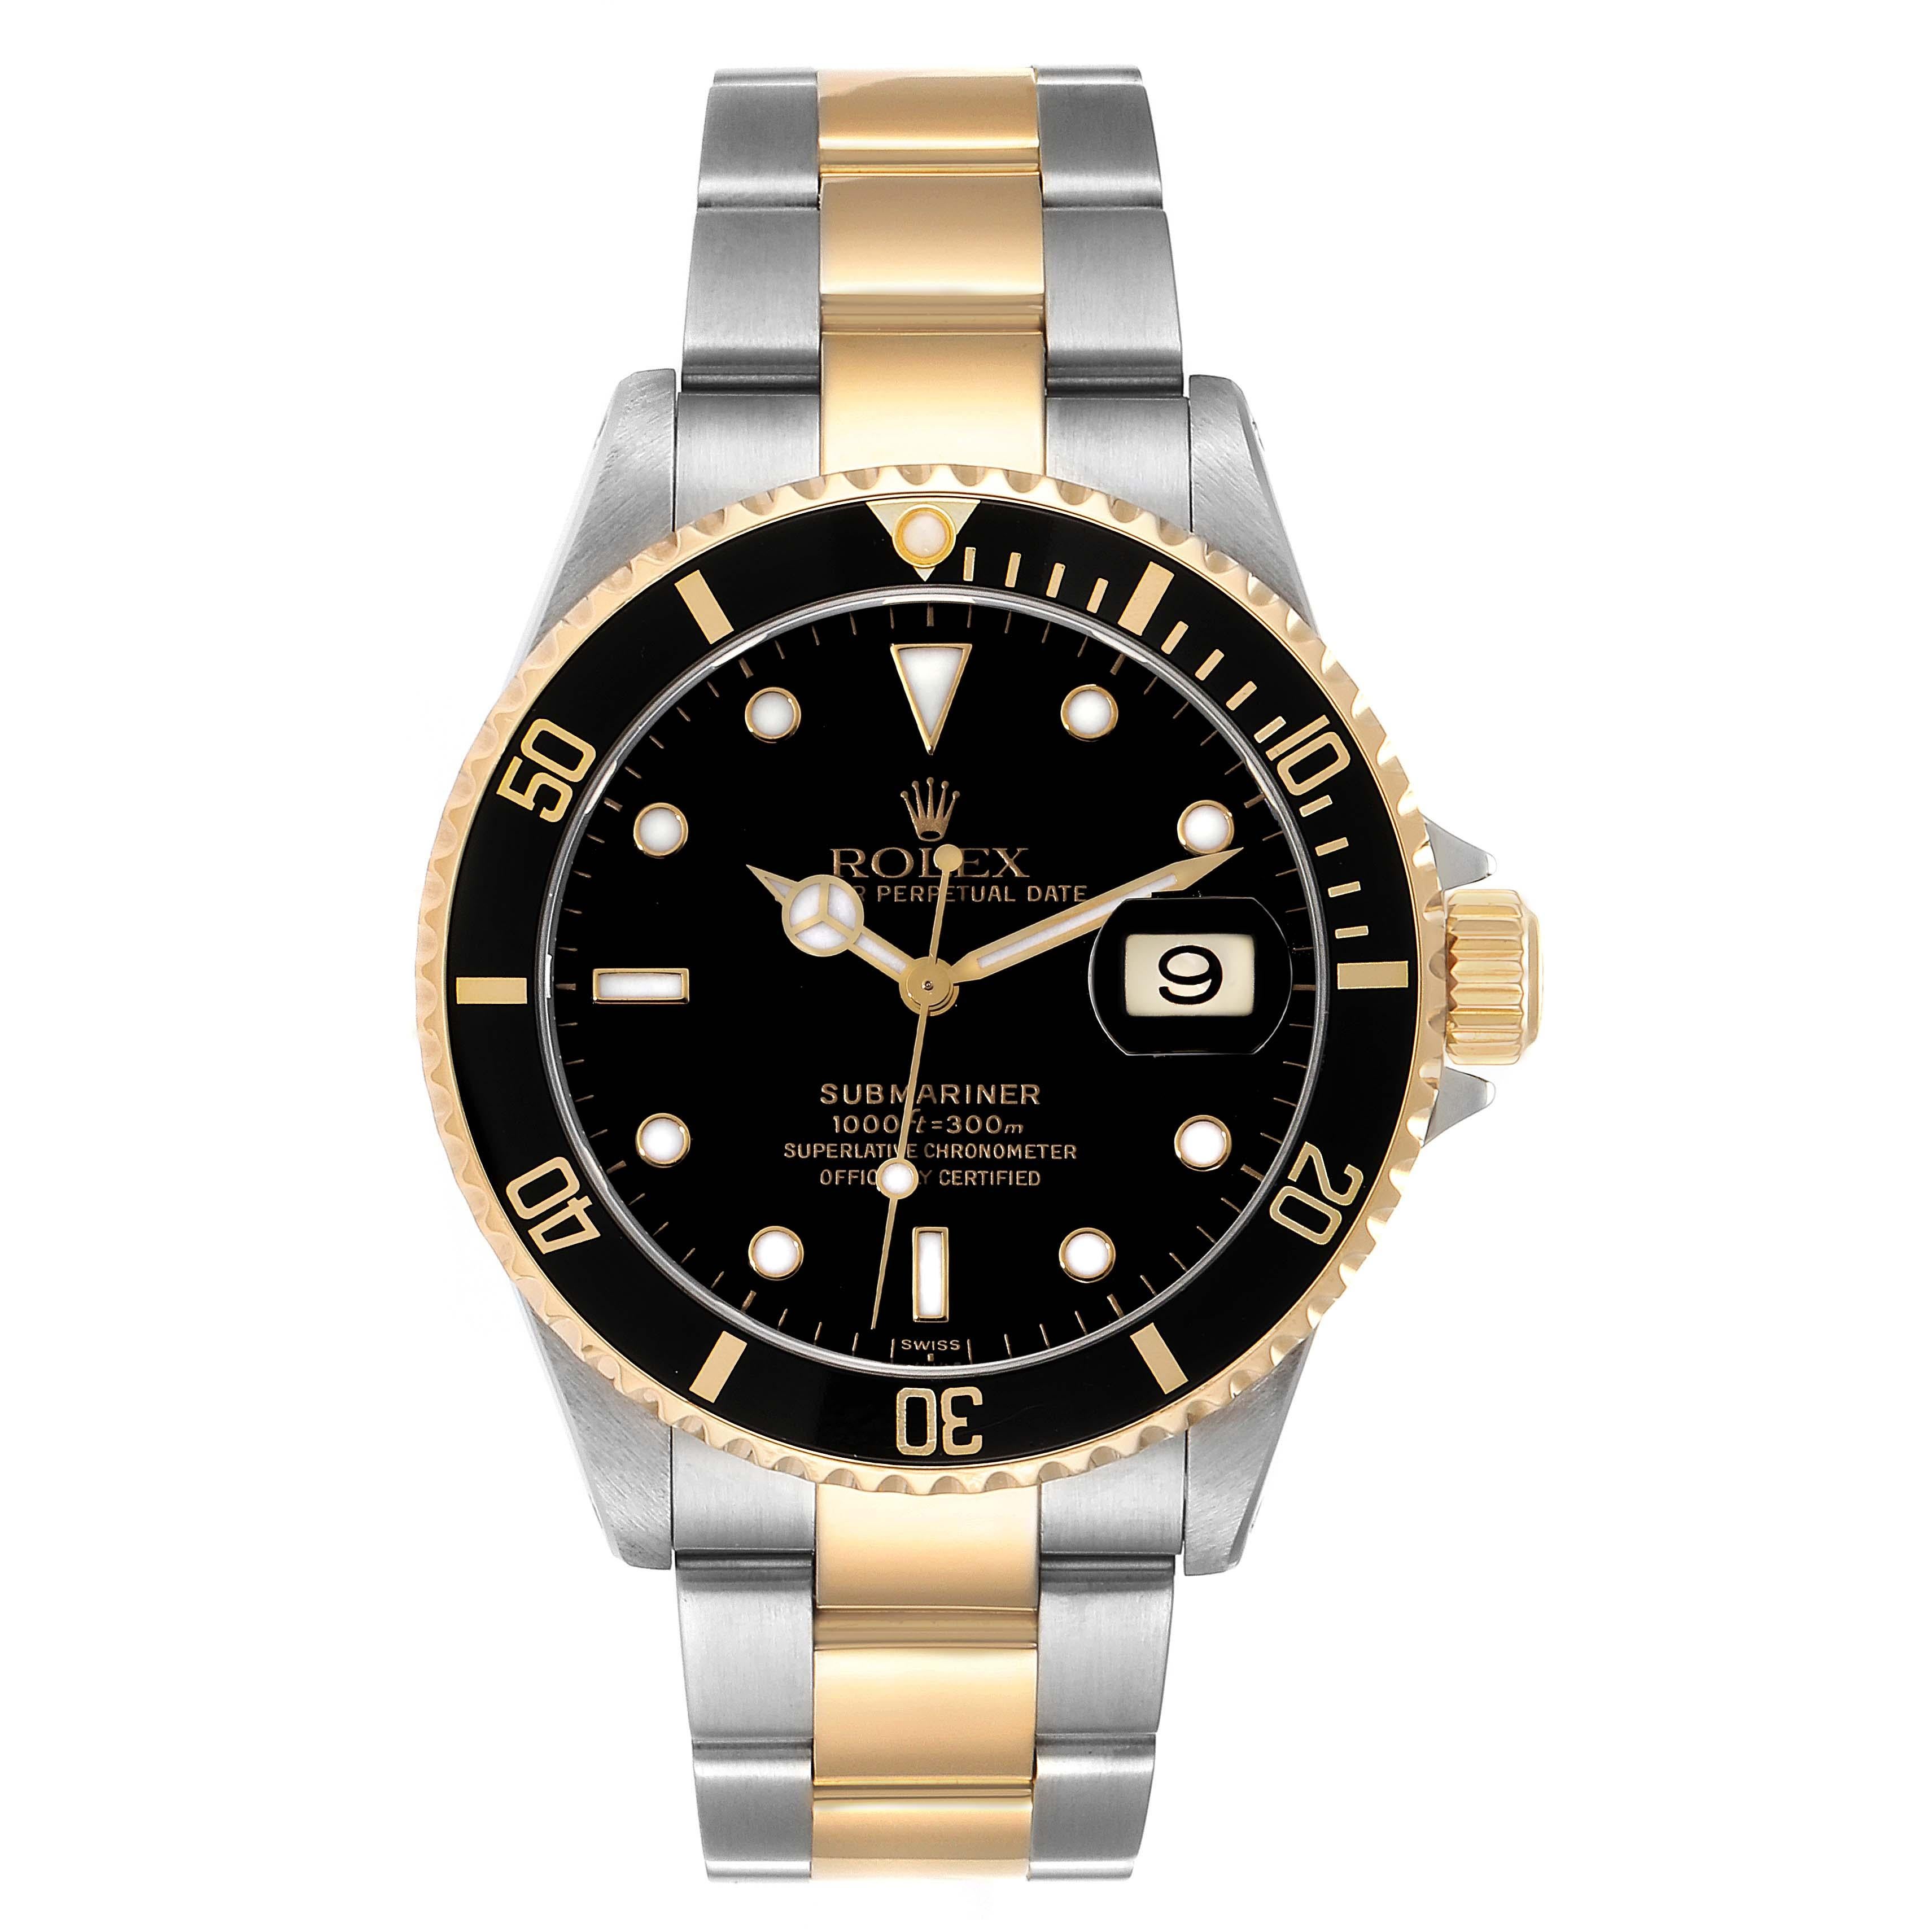 Rolex Submariner Steel Yellow Gold Black Dial Mens Watch 16613 Box Papers. Officially certified chronometer automatic self-winding movement. Stainless steel and 18k yellow gold case 40 mm in diameter. Rolex logo on the crown. Special time-lapse